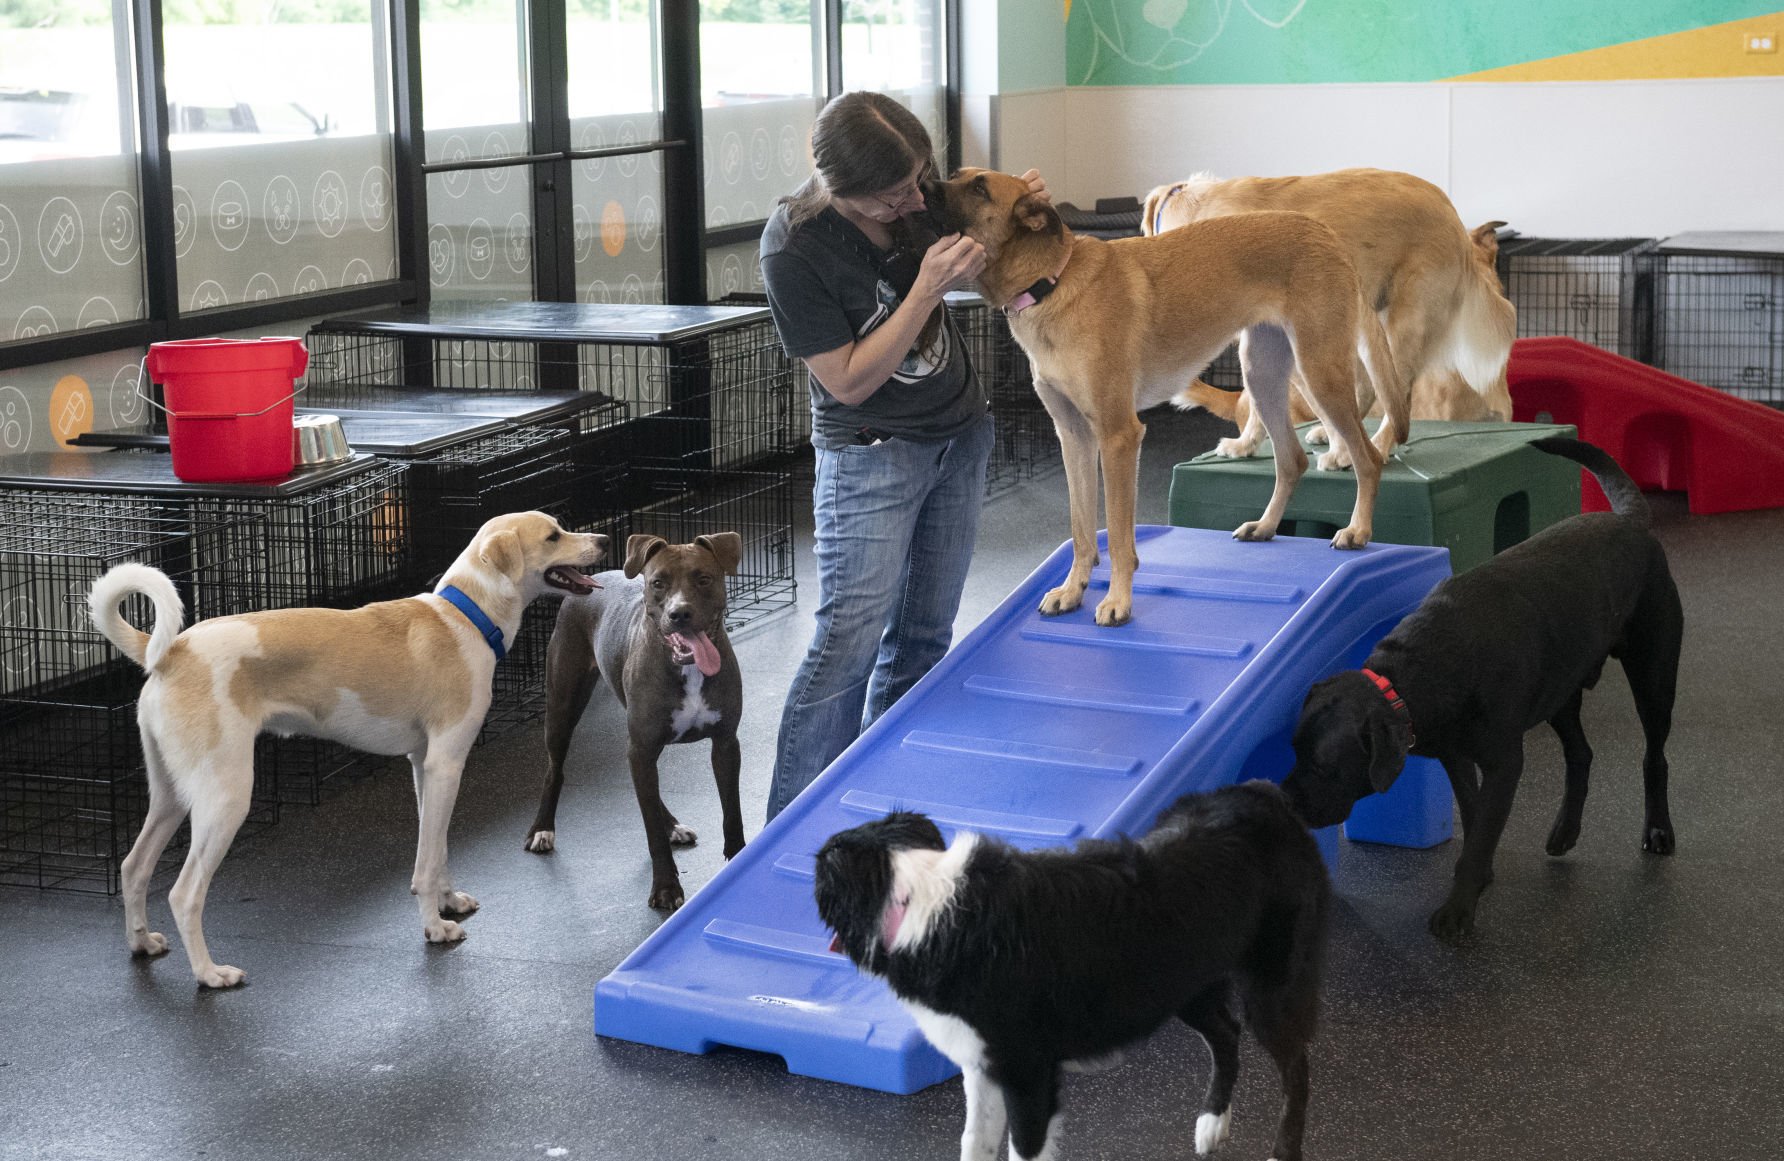 Doggy day care center opens in county 